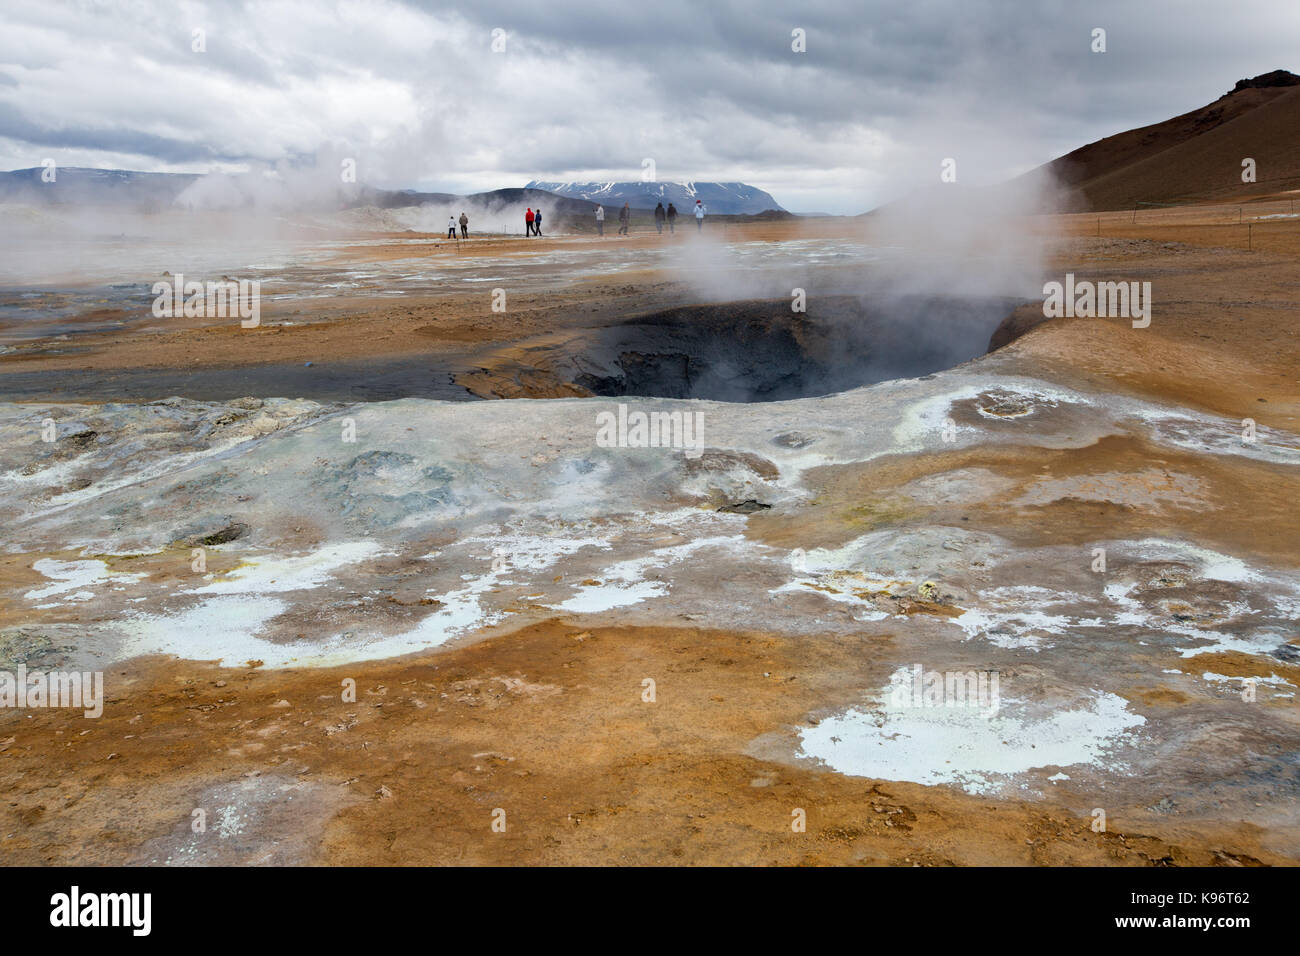 A view of the steaming mud pots geothermal area near Lake Myvatn. Stock Photo